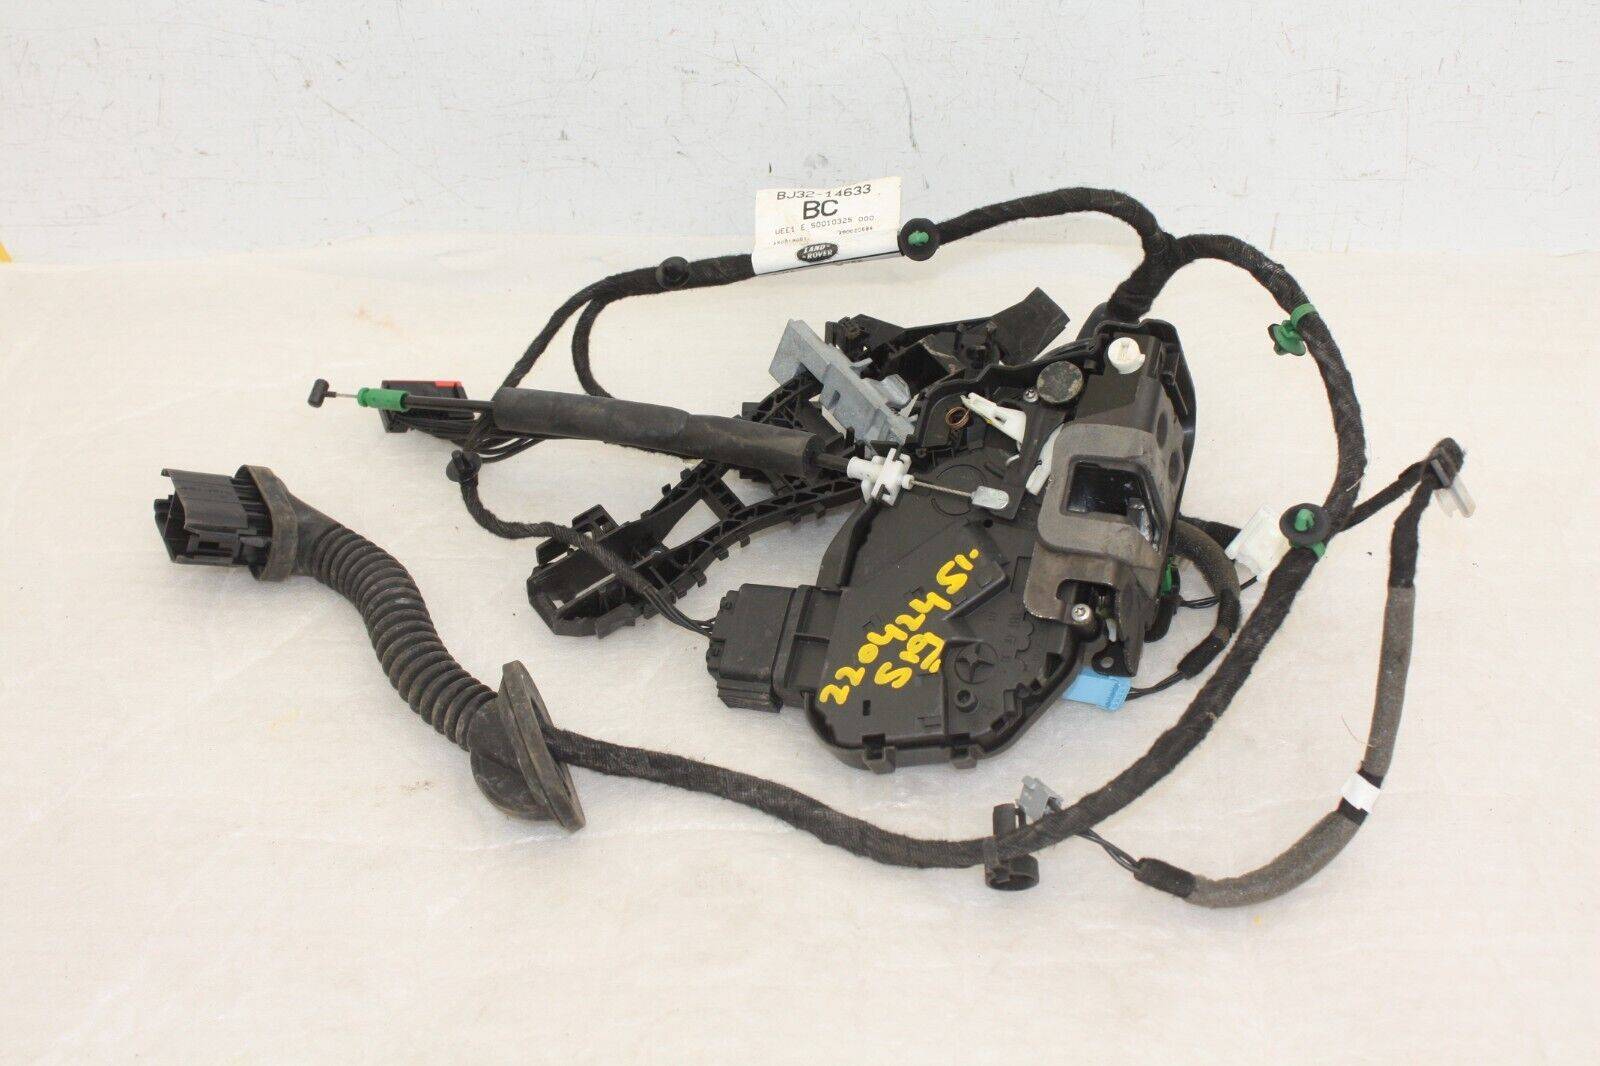 Range Rover Evoque L538 Rear Right Door Wiring Loom With Motor BJ32 14633 BC 176345734719